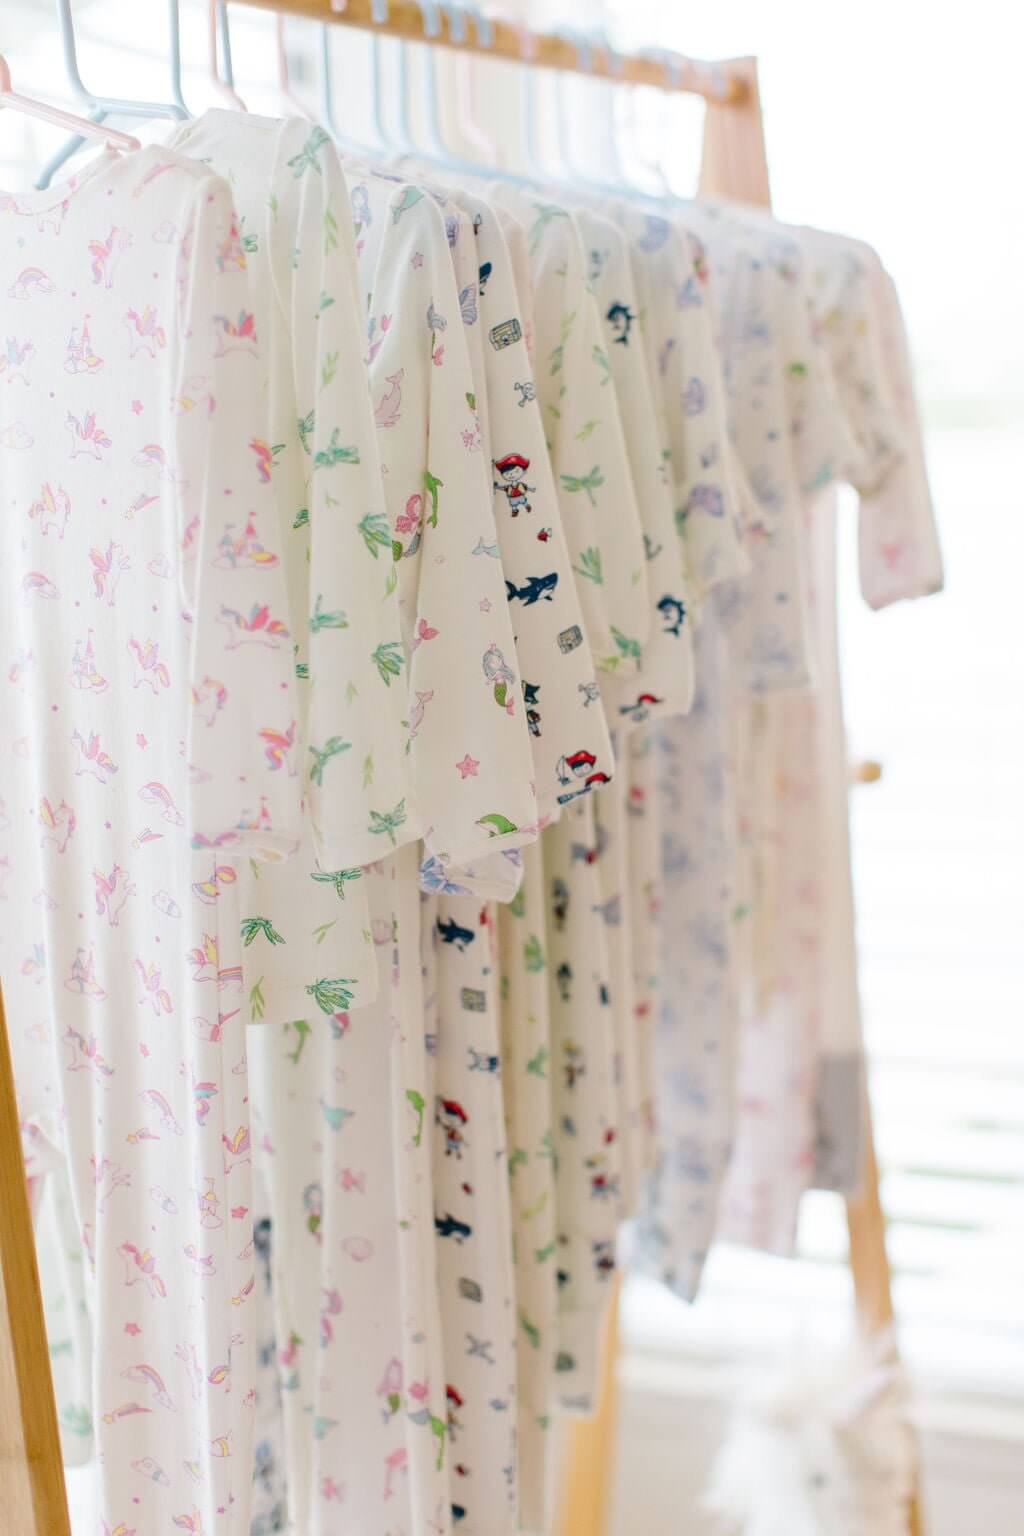 The Softest Organic Bamboo Baby Pajamas - Our Favorites